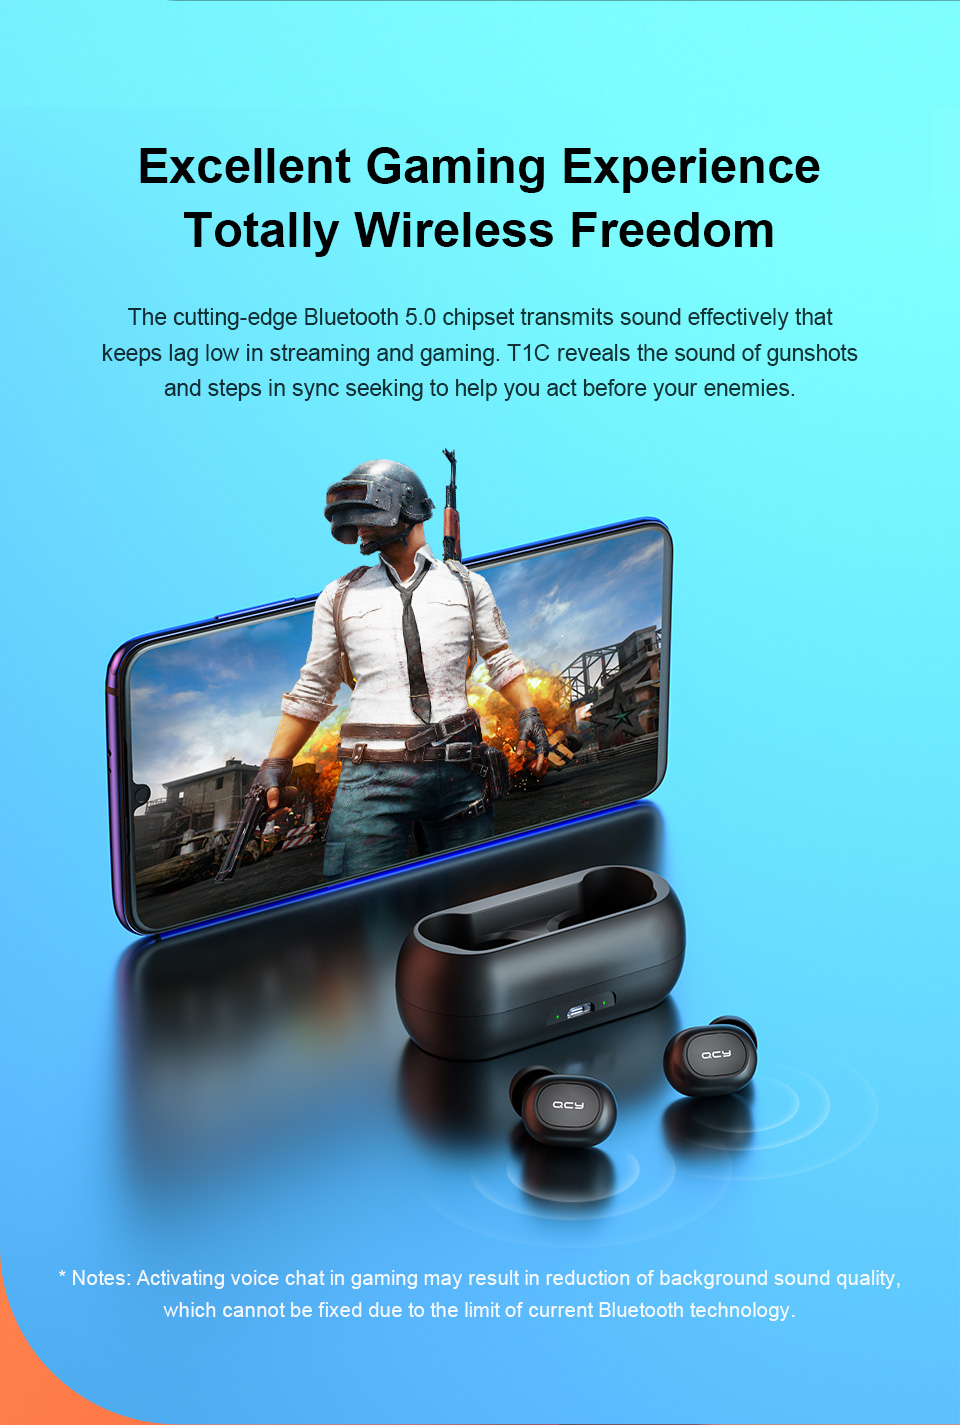 Excellent Gaming Experience, totally wireless freedom